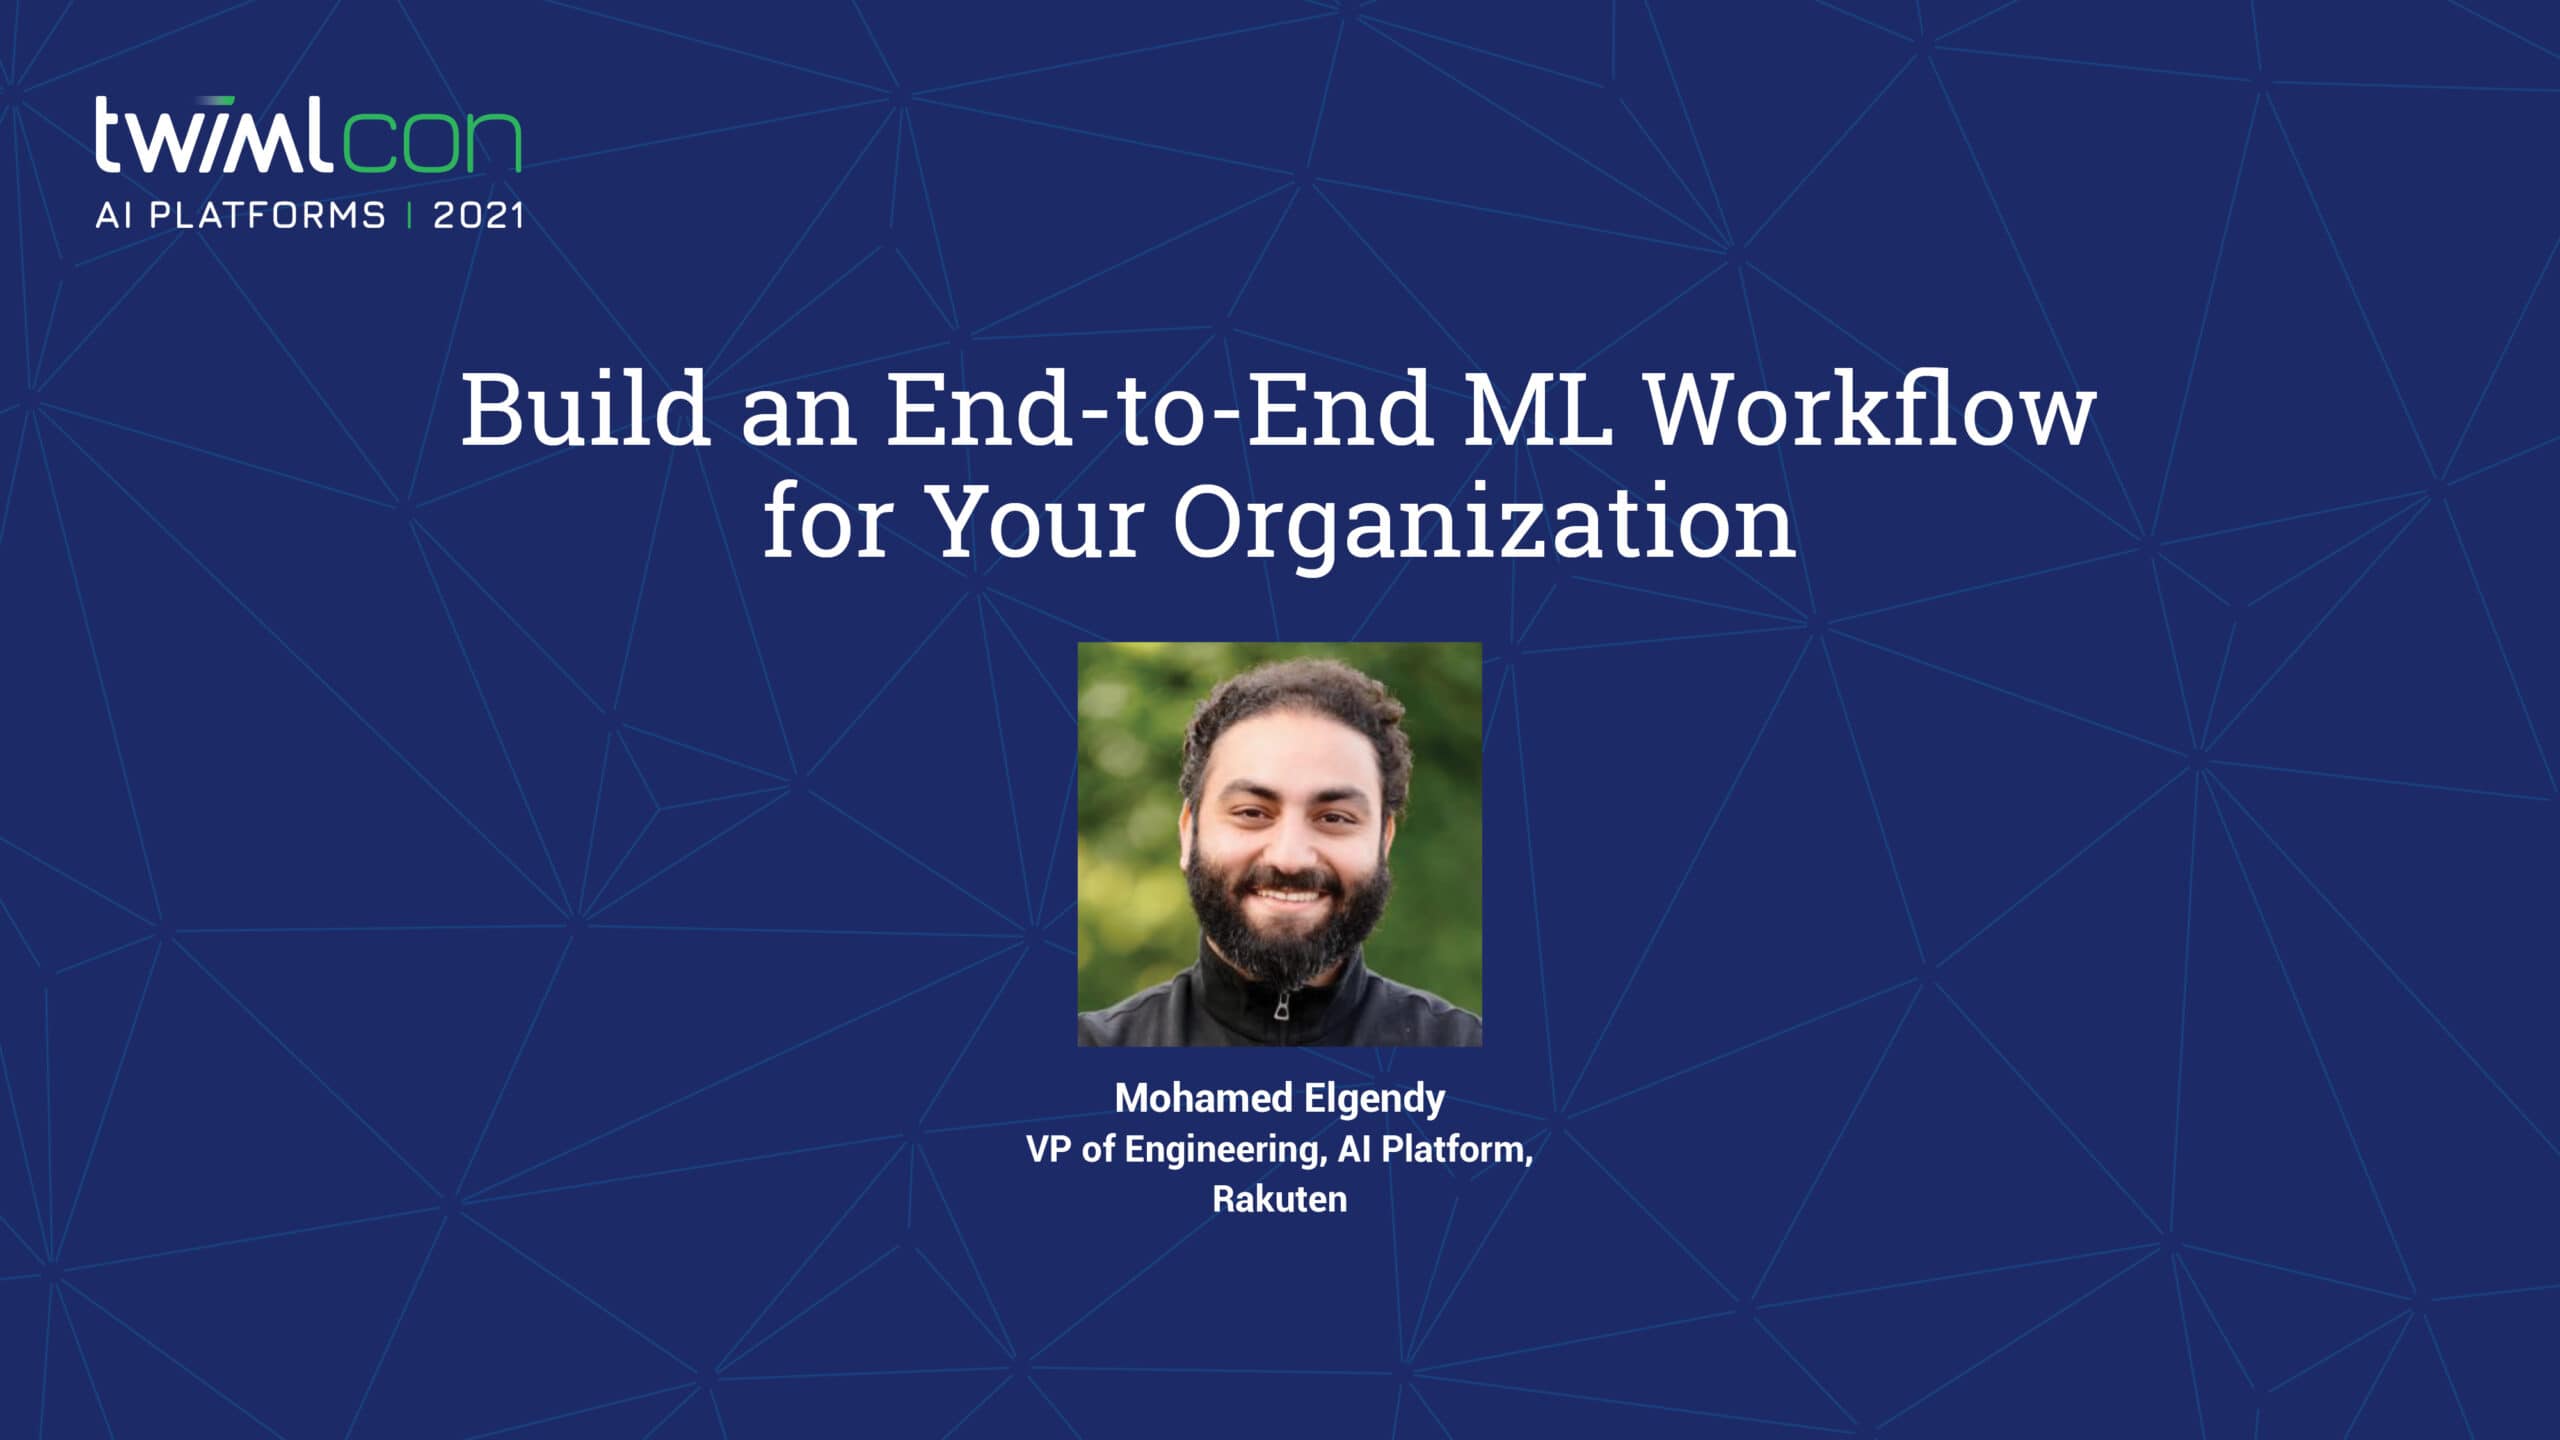 Build an End-to-End ML Workflow for Your Organization